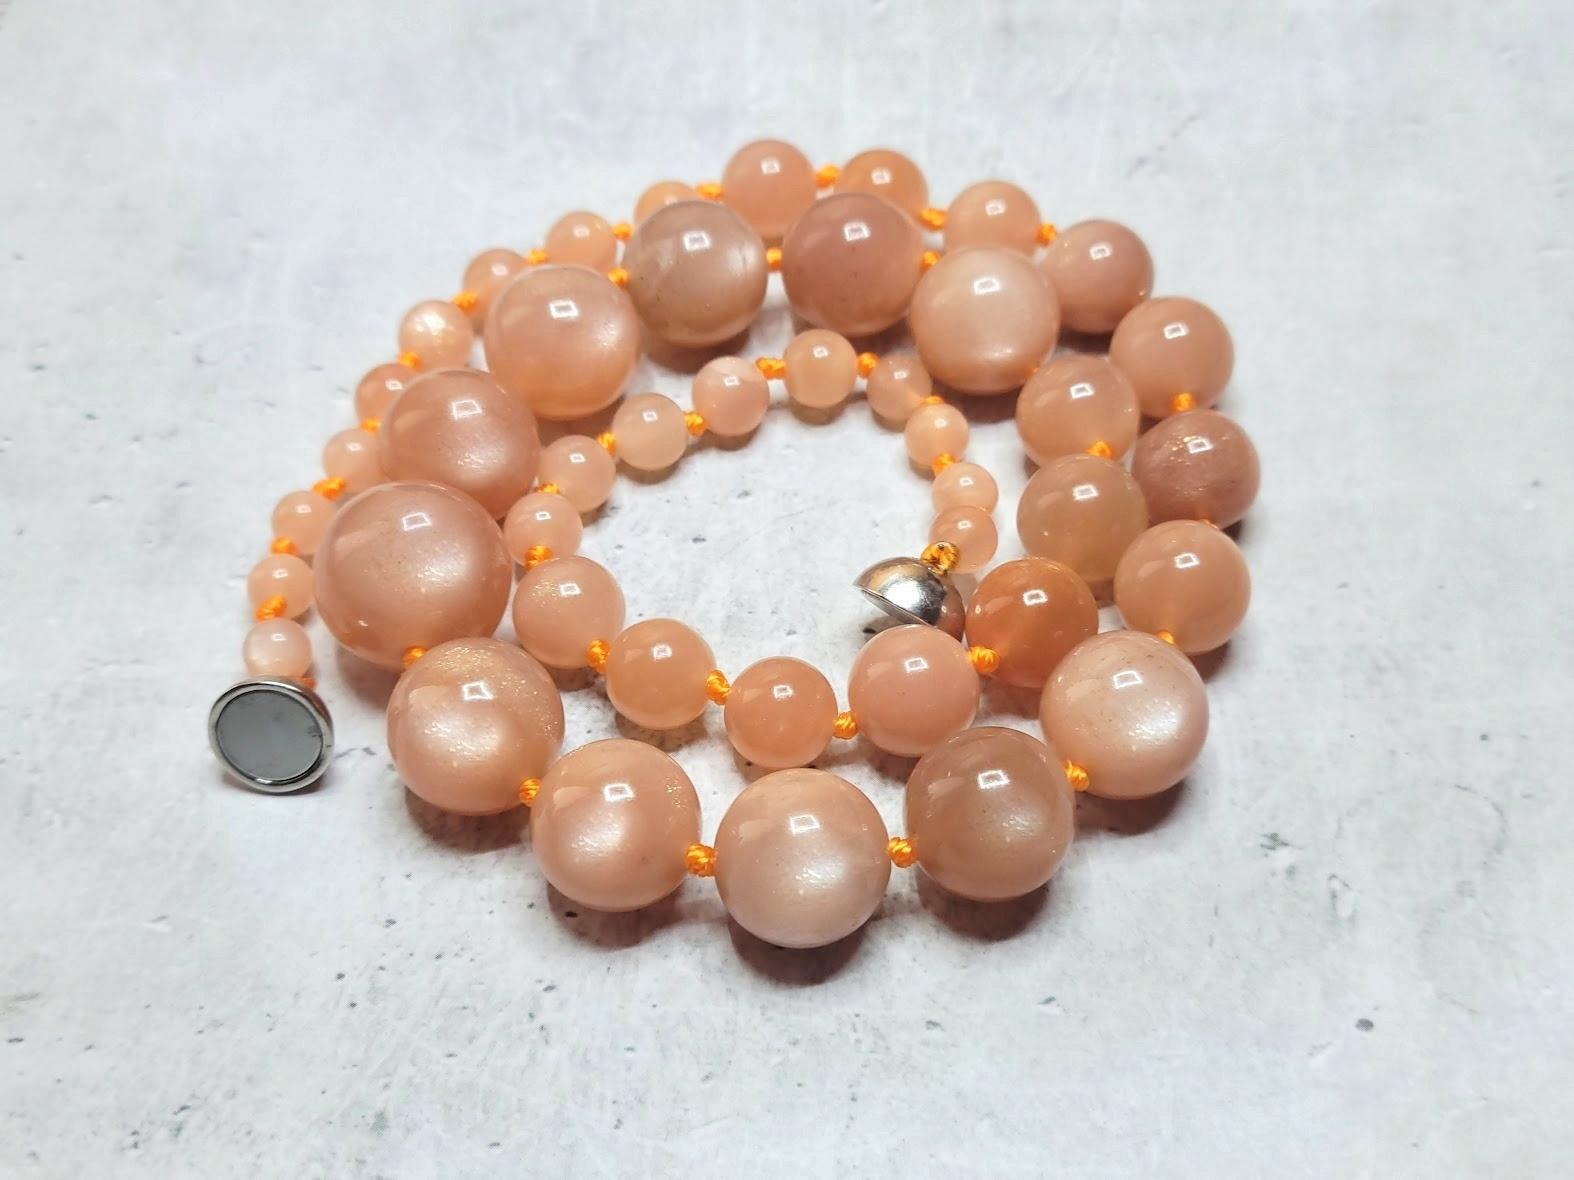 This necklace measures 18.5 inches (47 cm) in length and features smooth round beads ranging from 5 mm to 15 mm in size. The beads have a lovely, soft, and uniform peach tone with a shimmering gold hue. The color is entirely natural, and no thermal